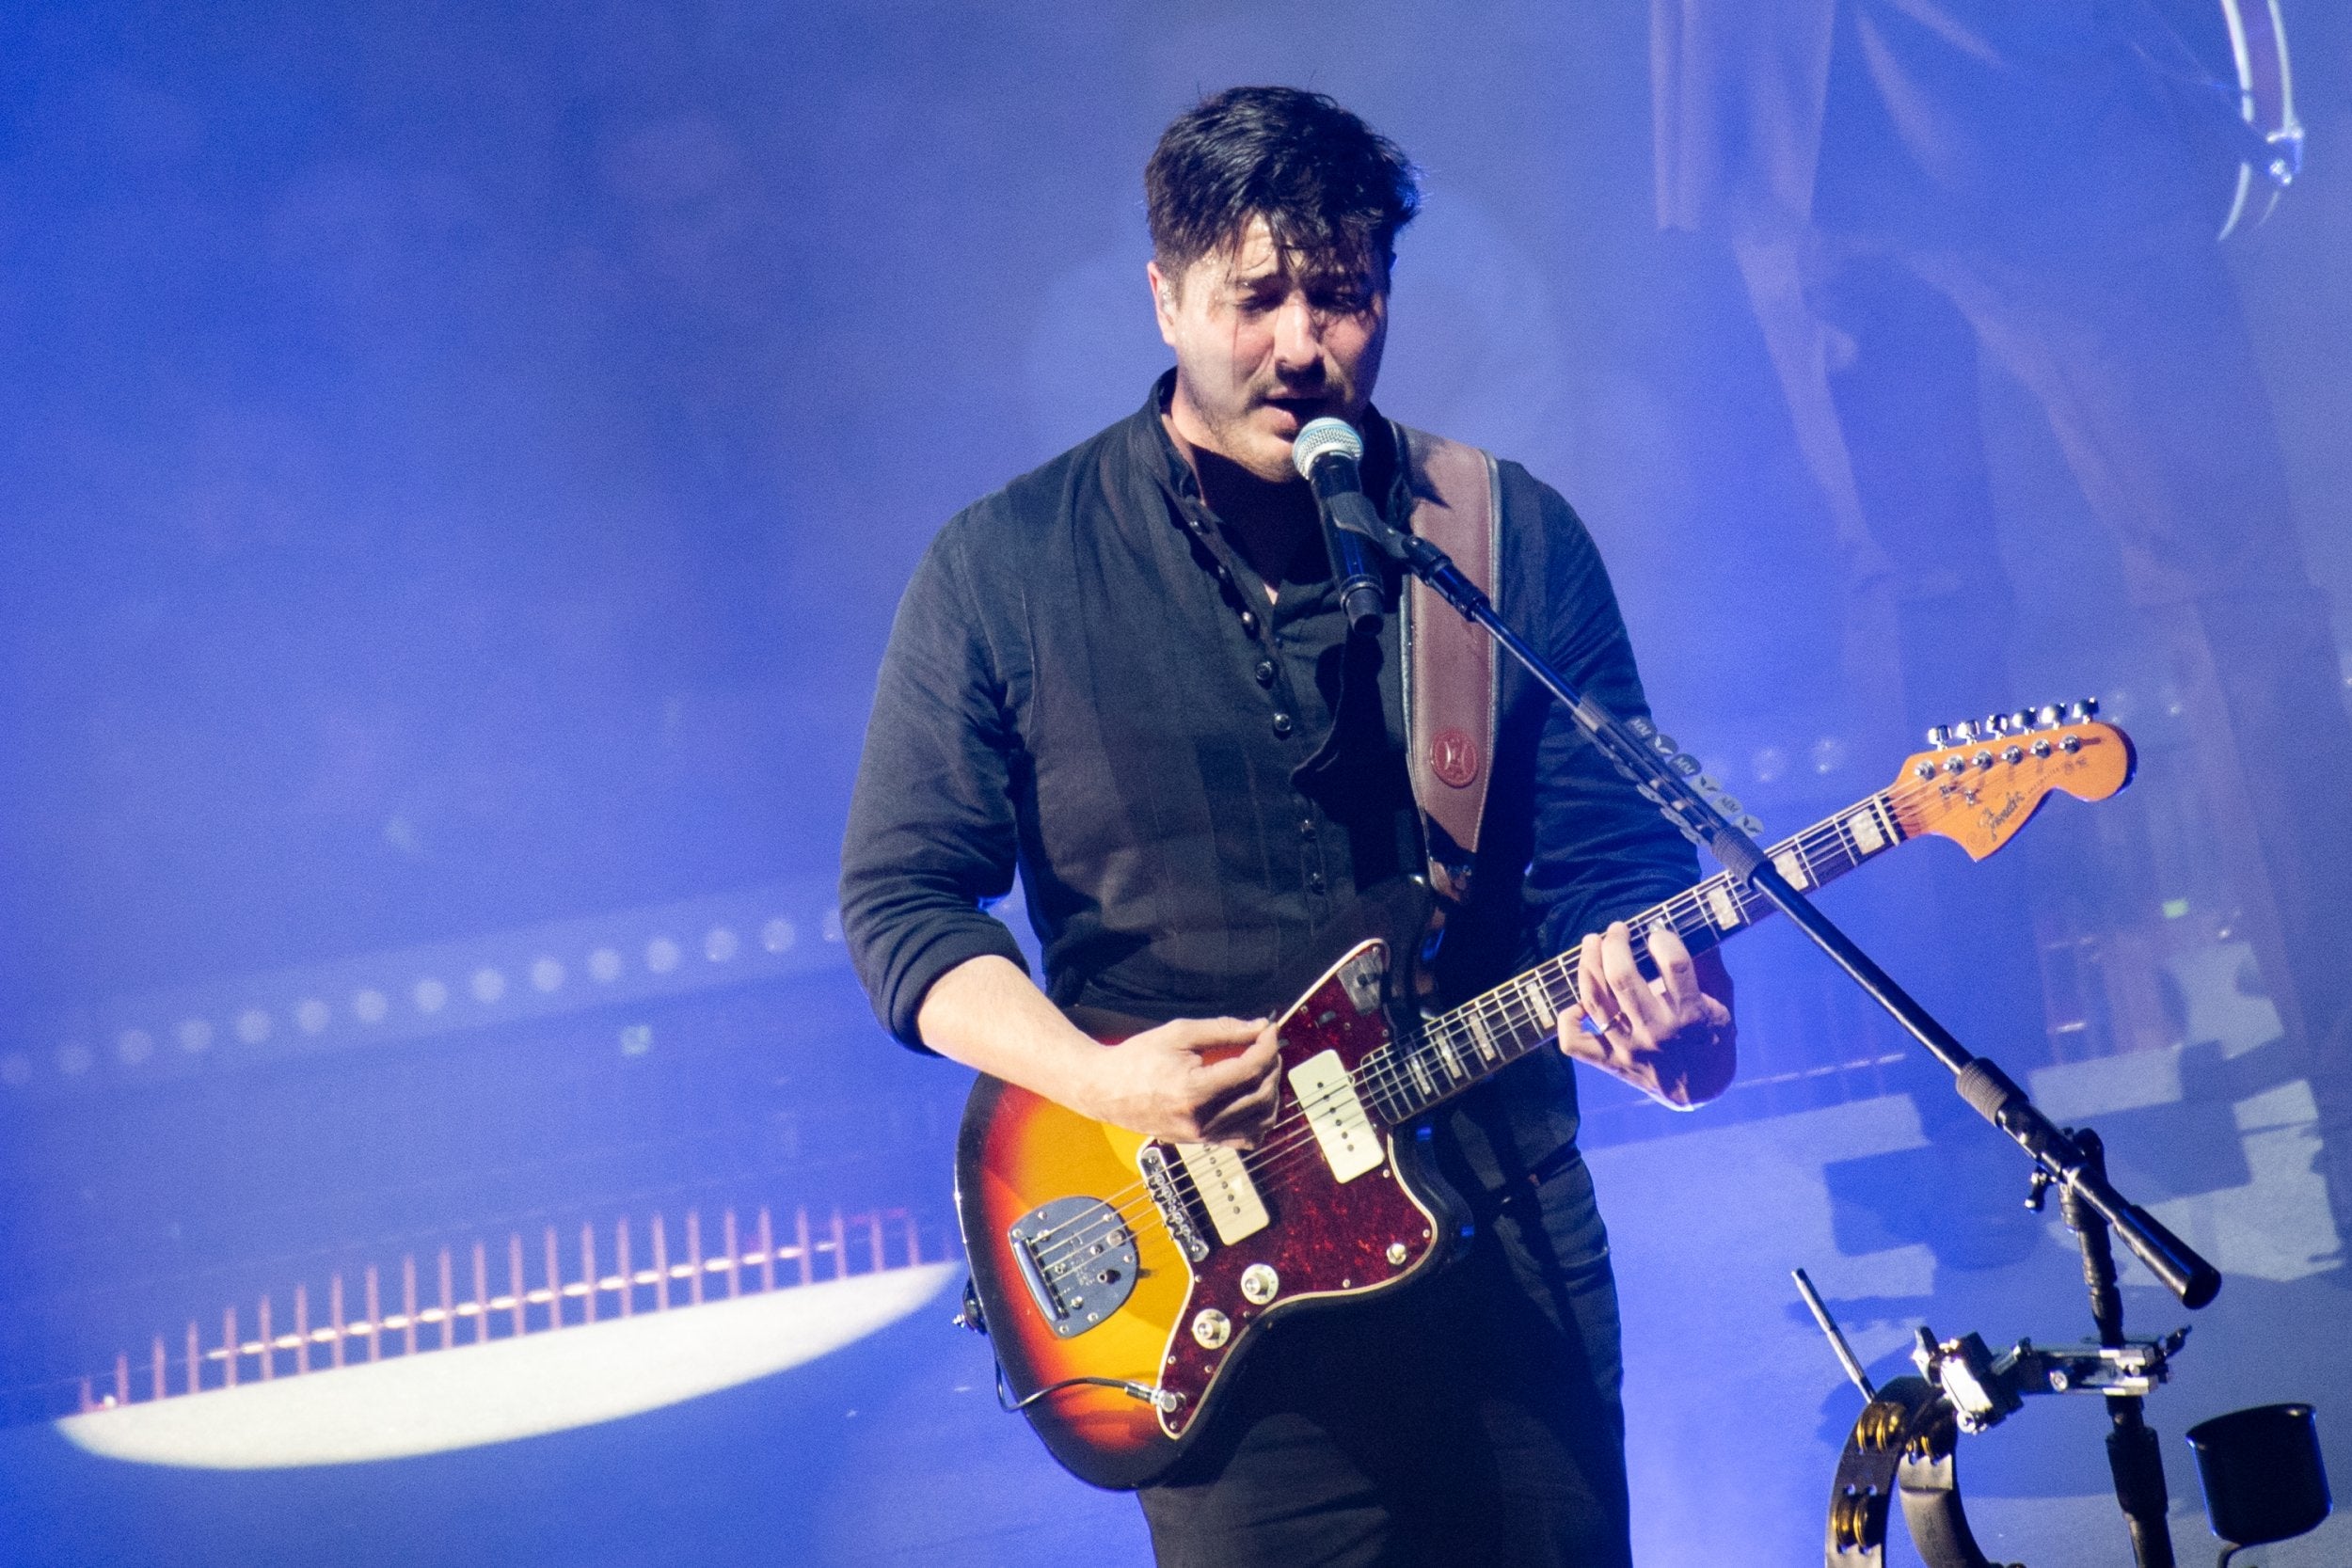 Mumford & Sons frontman Marcus Mumford performs on stage in Glasgow